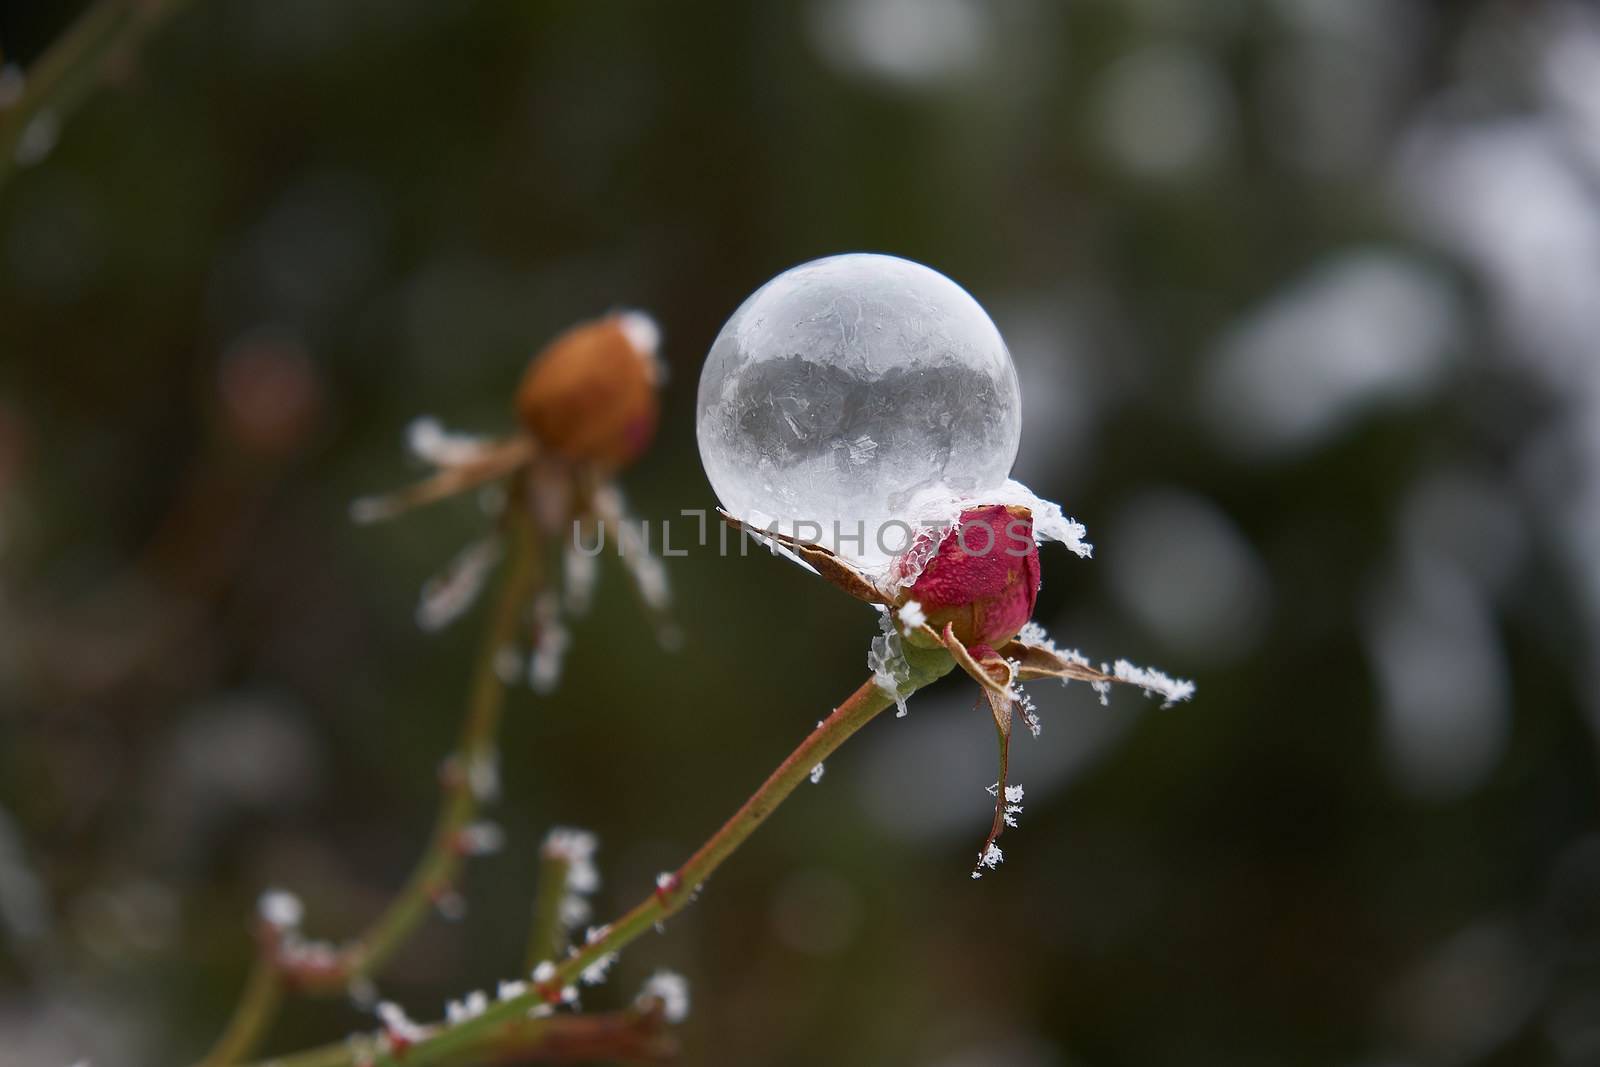 Frozen rose with a soap ball